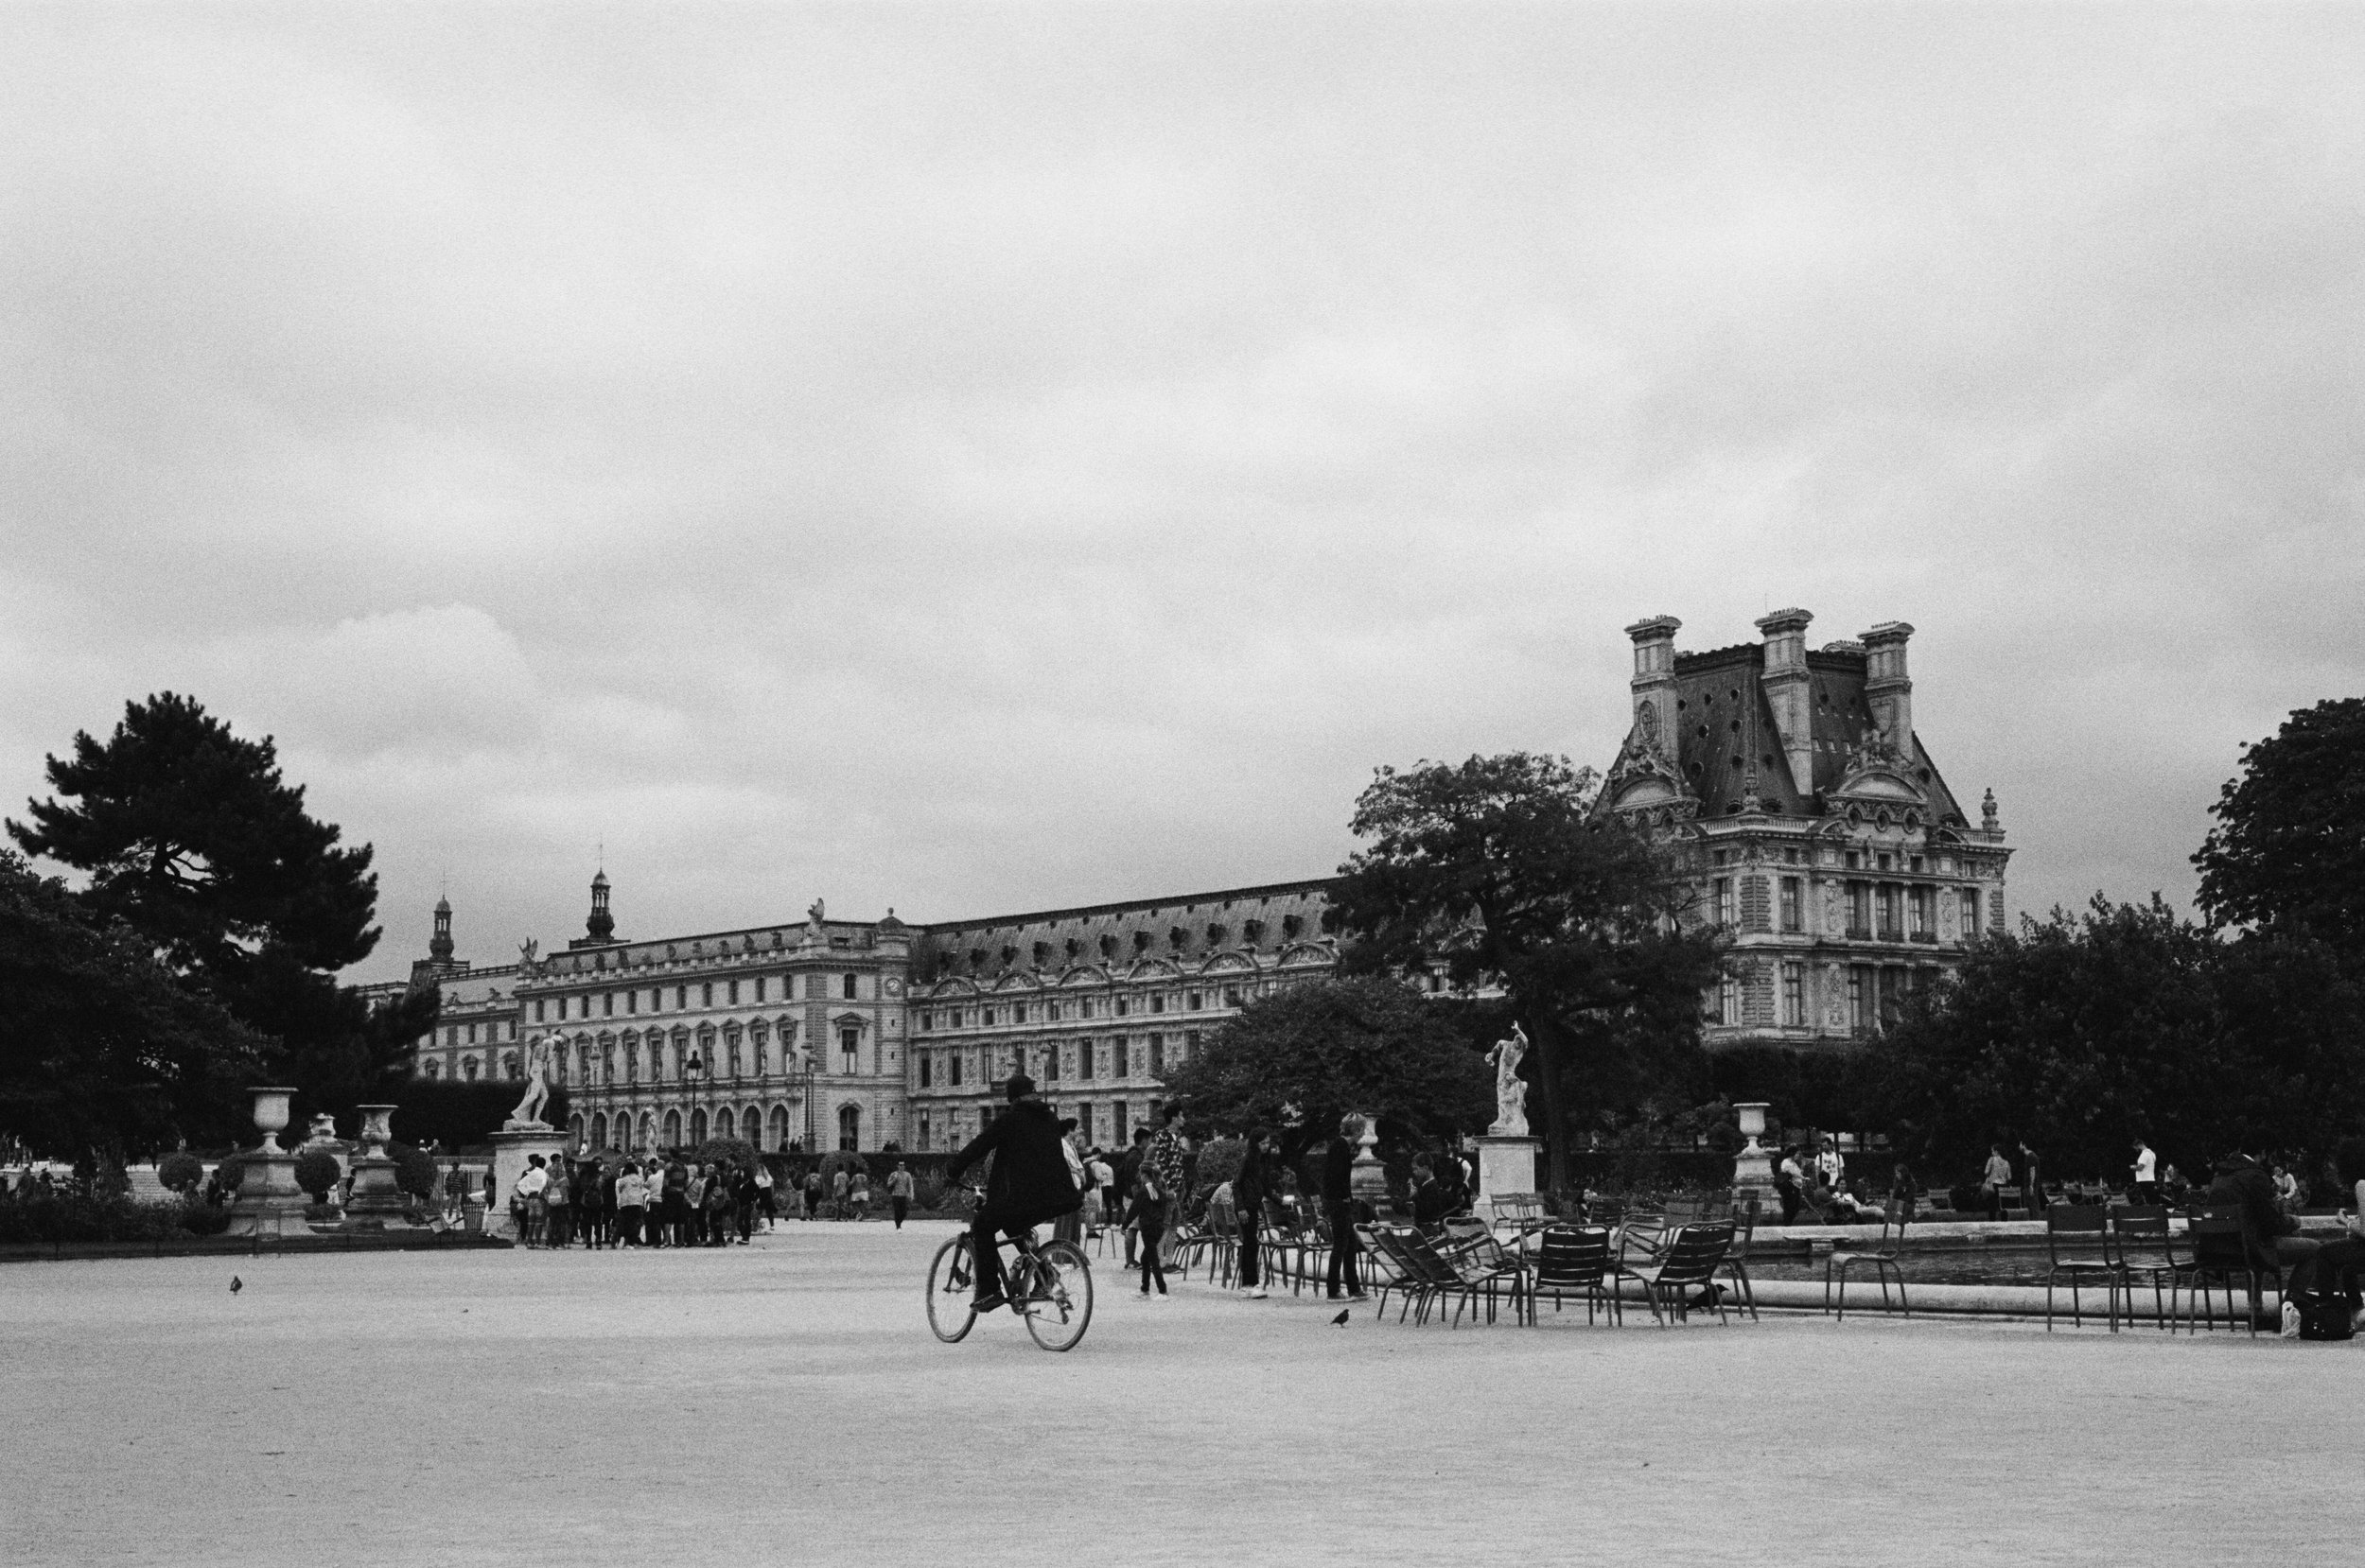 Tuileries Gardens 03 - inquire for purchase and size